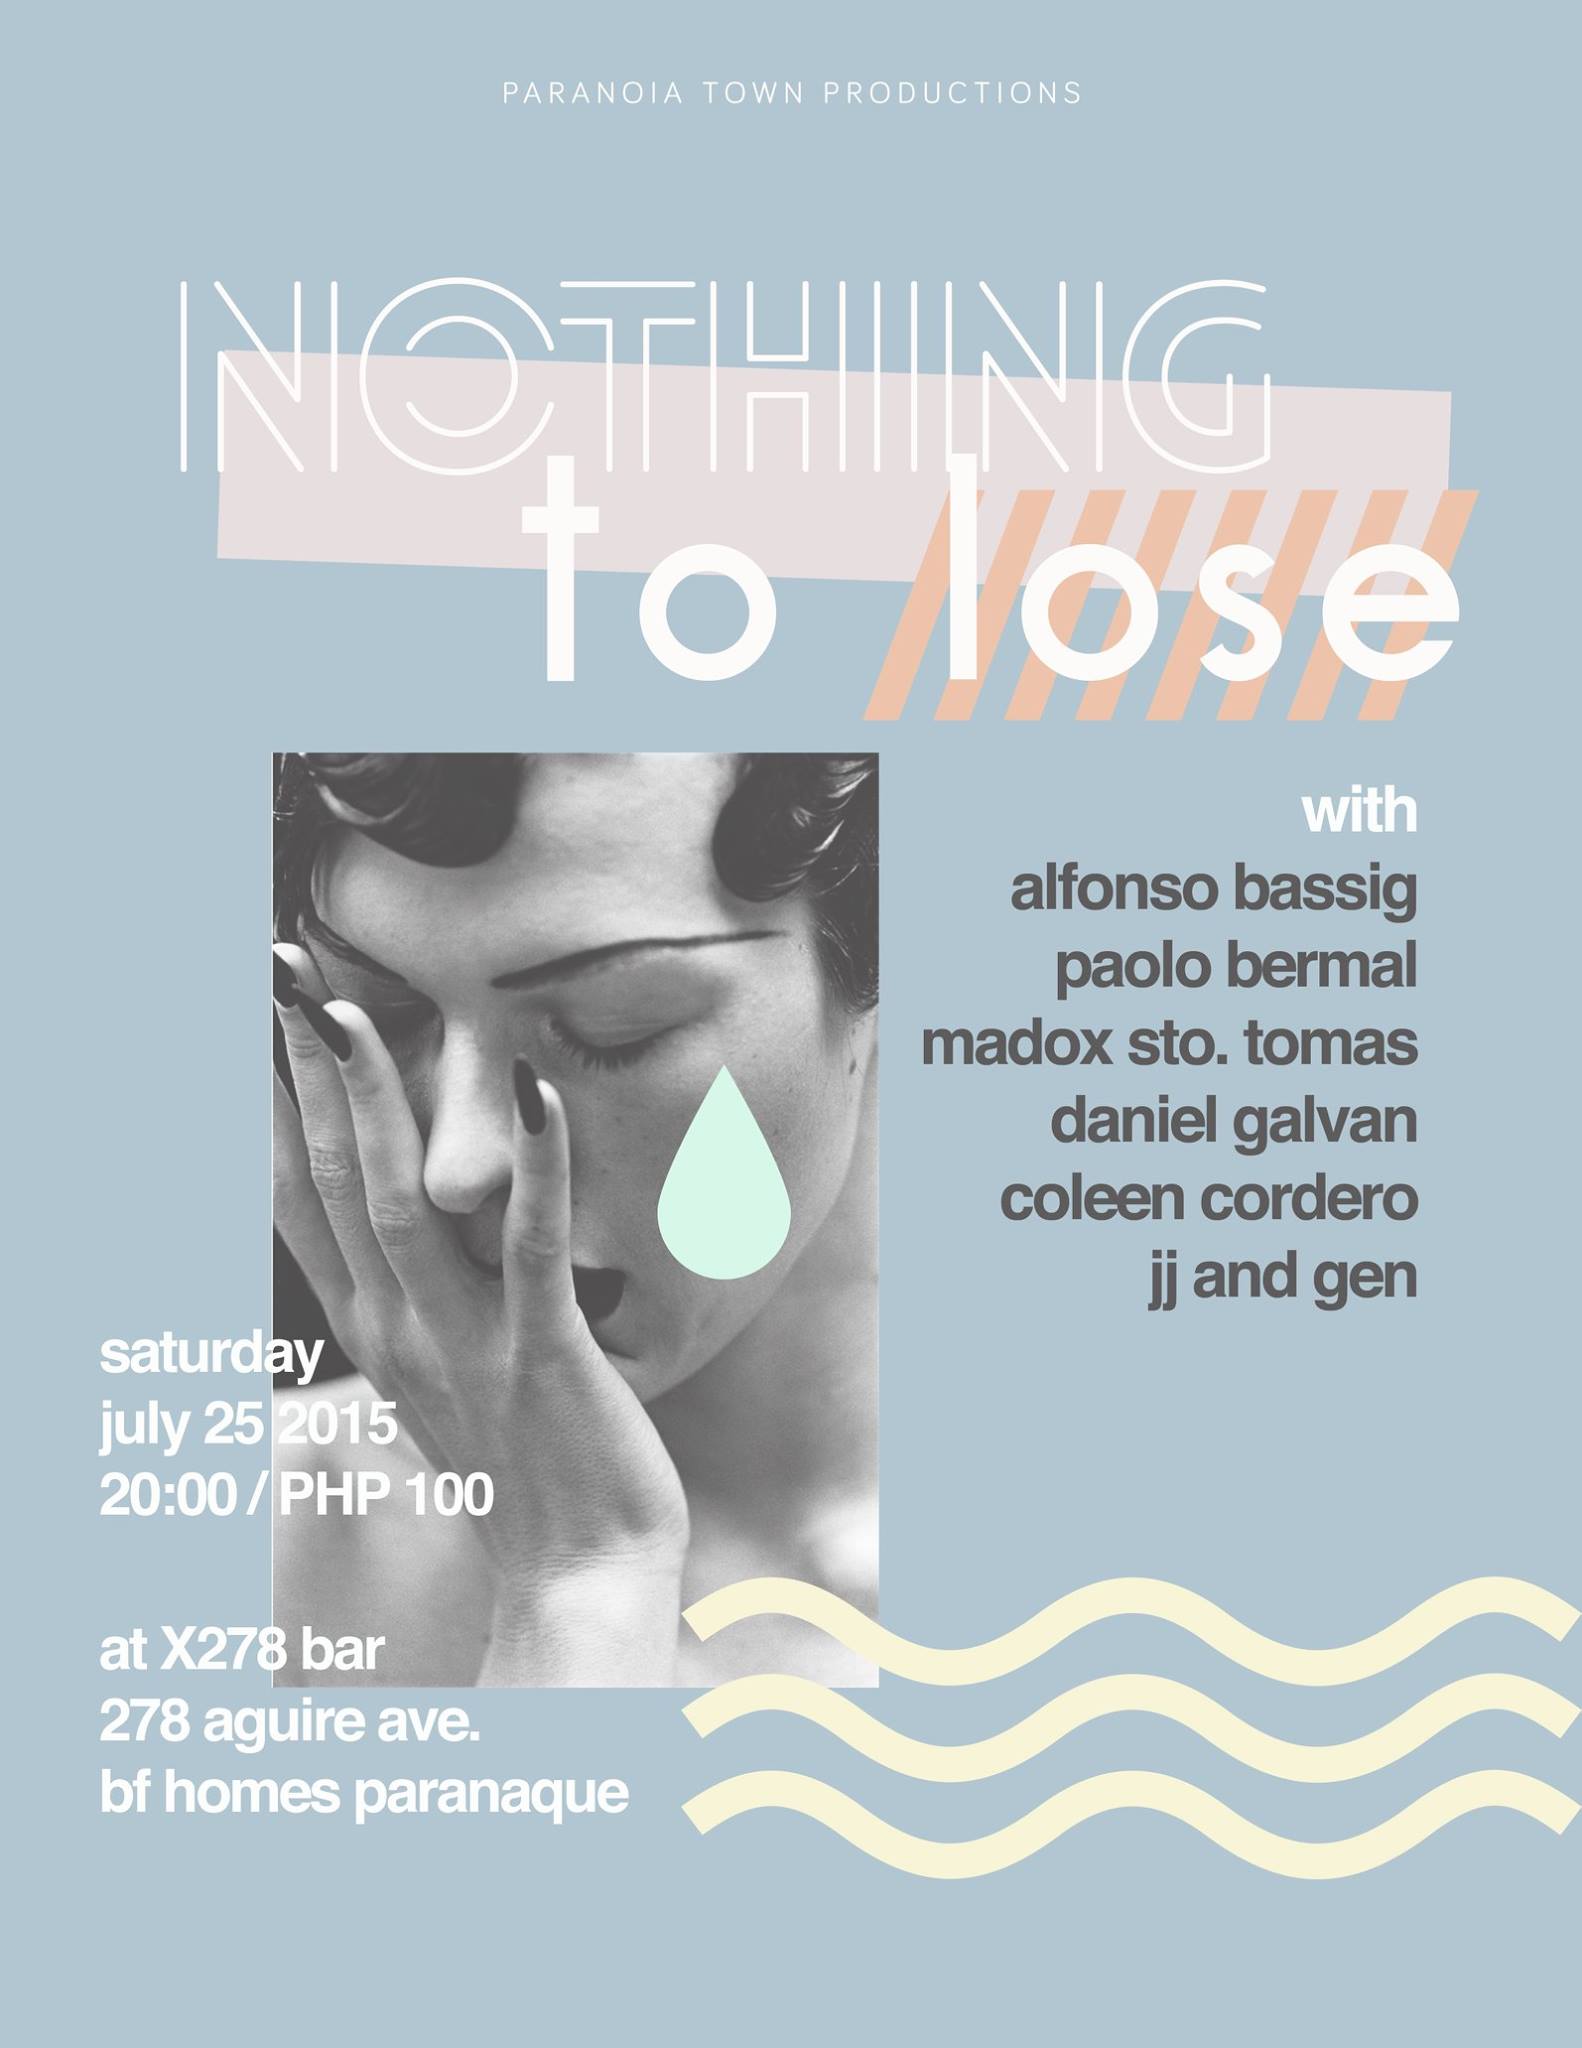 "Nothing To Lose"     Saturday, July 25     at 8:00pm - 2:00am     Jul 25 at 8:00pm to Jul 26 at 2:00am          Show Map     X278     278 A. Aguirre Ave., Phase 3, BF Homes,, 1709 Parañaque Paranoia Town Productions presents: "Nothing to Lose" We've decided to host a chill feels night for all you music-loving and soul-searching individuals. Let's all feels together lolz Opening Acts: Alexis Lumen Cams Florentino Performances by ALFONSO BASSIG PAOLO BERMAL MADOX STO. TOMAS JJ and GEN DANIEL GALVAN COLEEN CORDERO Doors open 8pm 100pesos Admission See you there